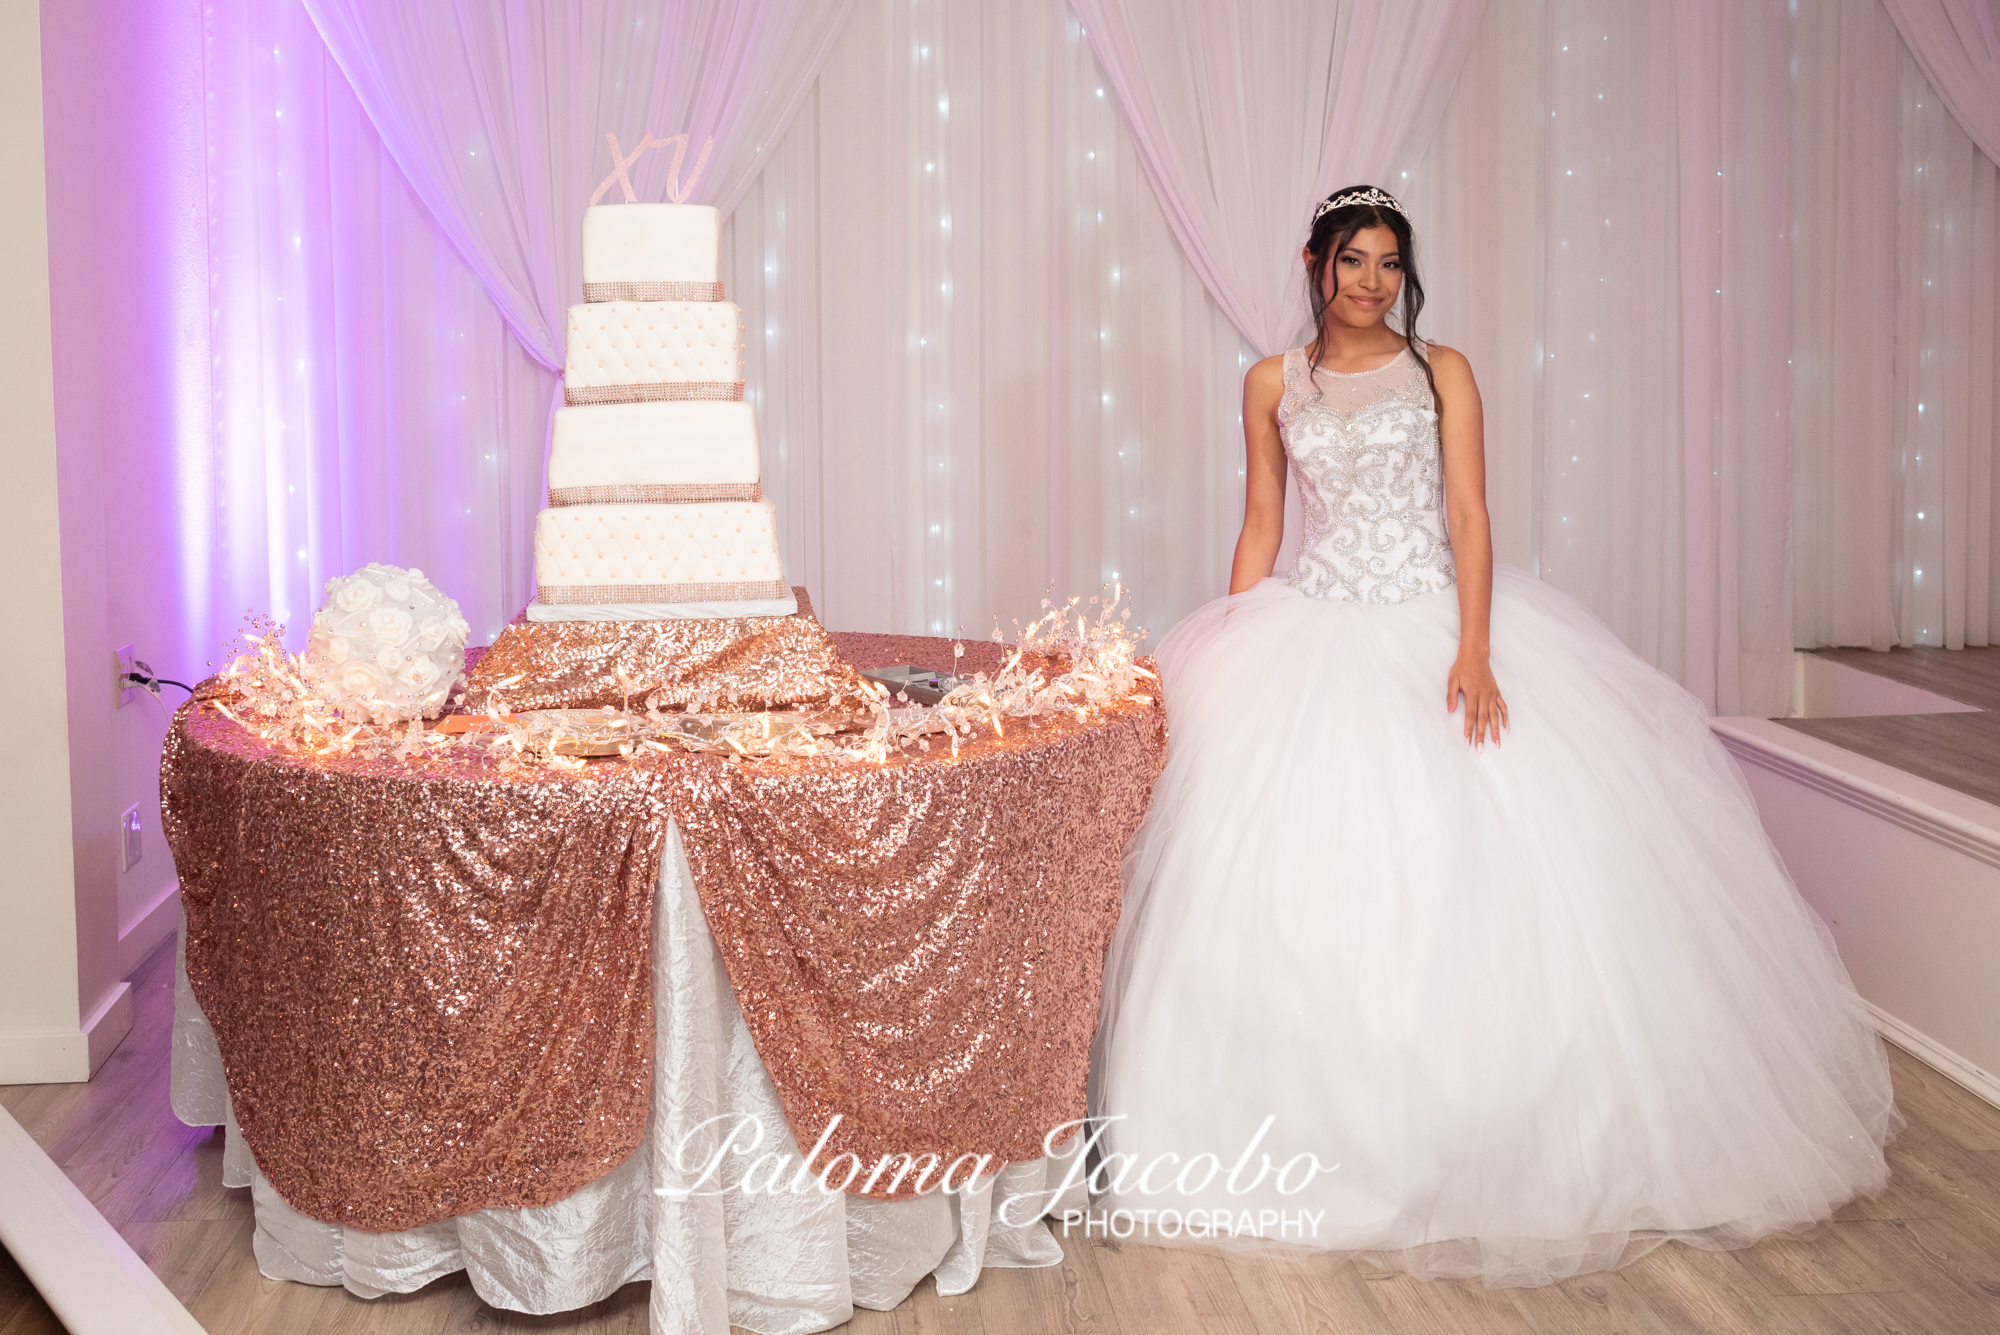 Quinceanera cake cutting by Paloma Jacobo Photography